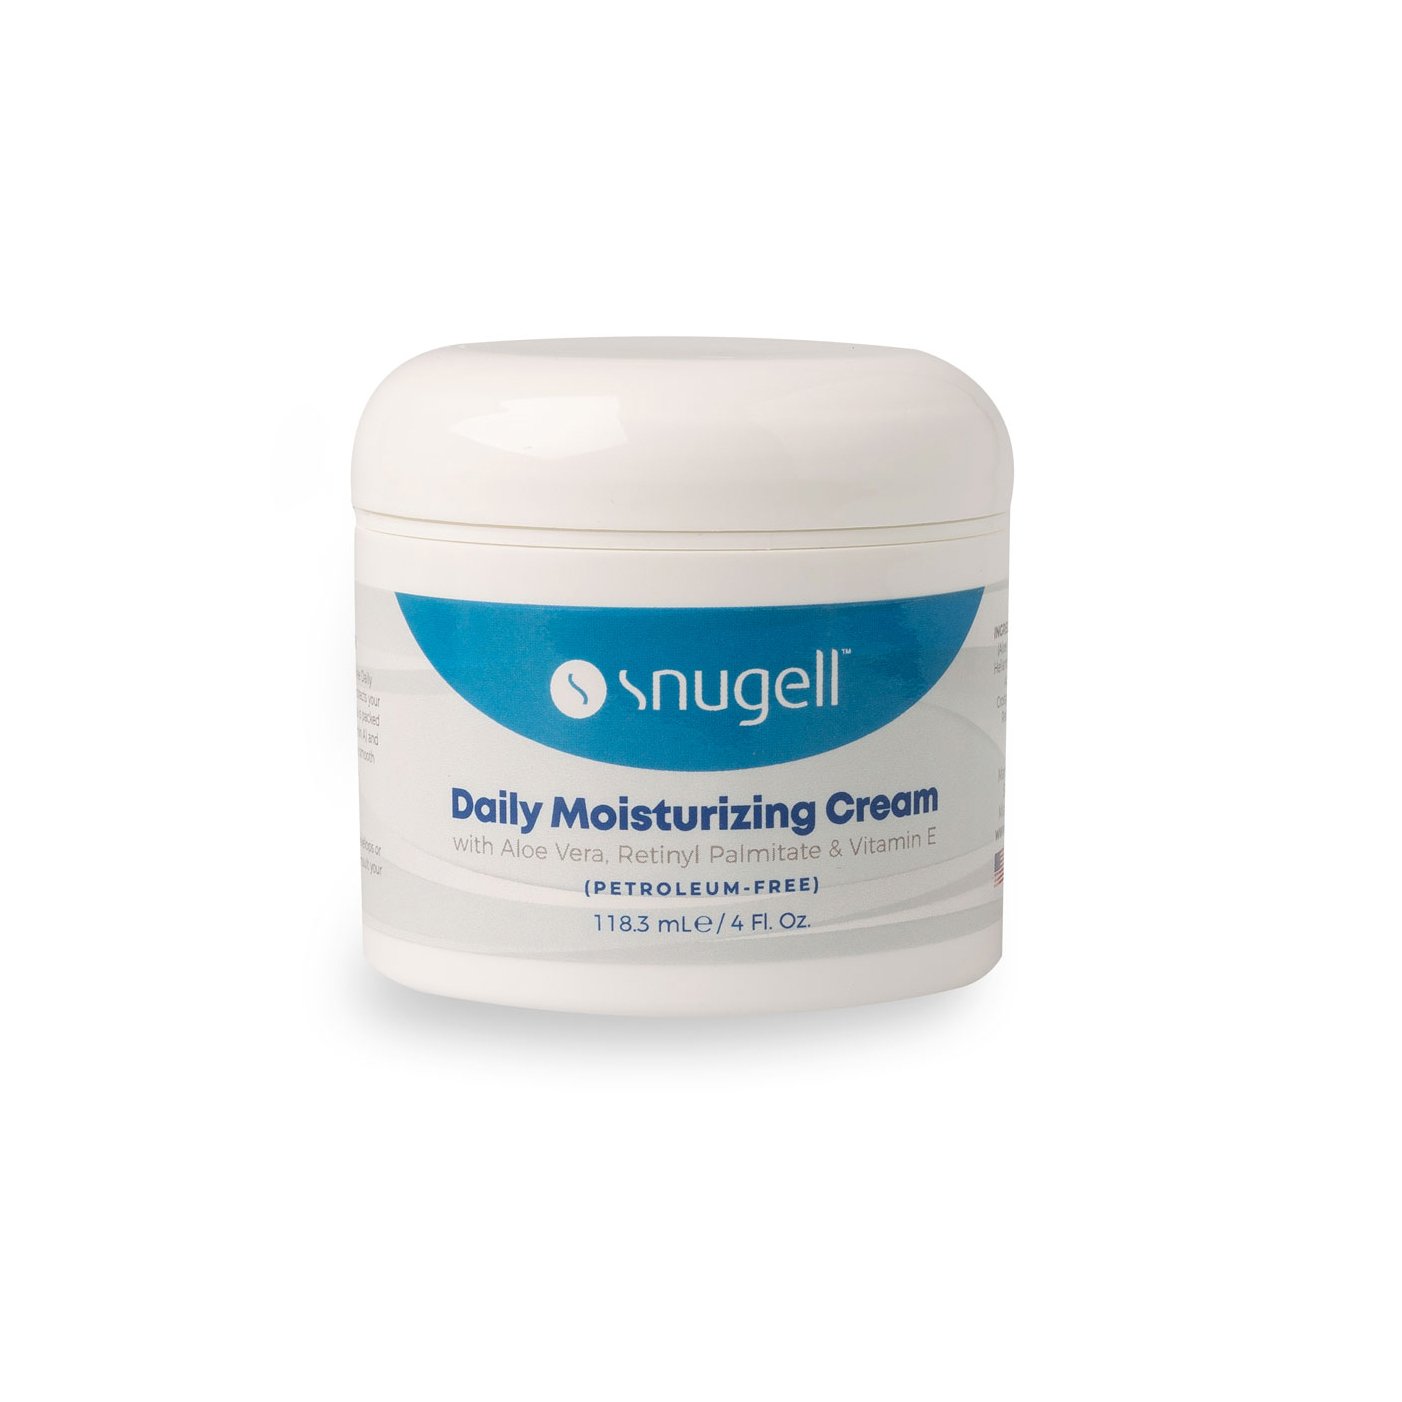 Front view of Snugell Daily Moisturizing Cream